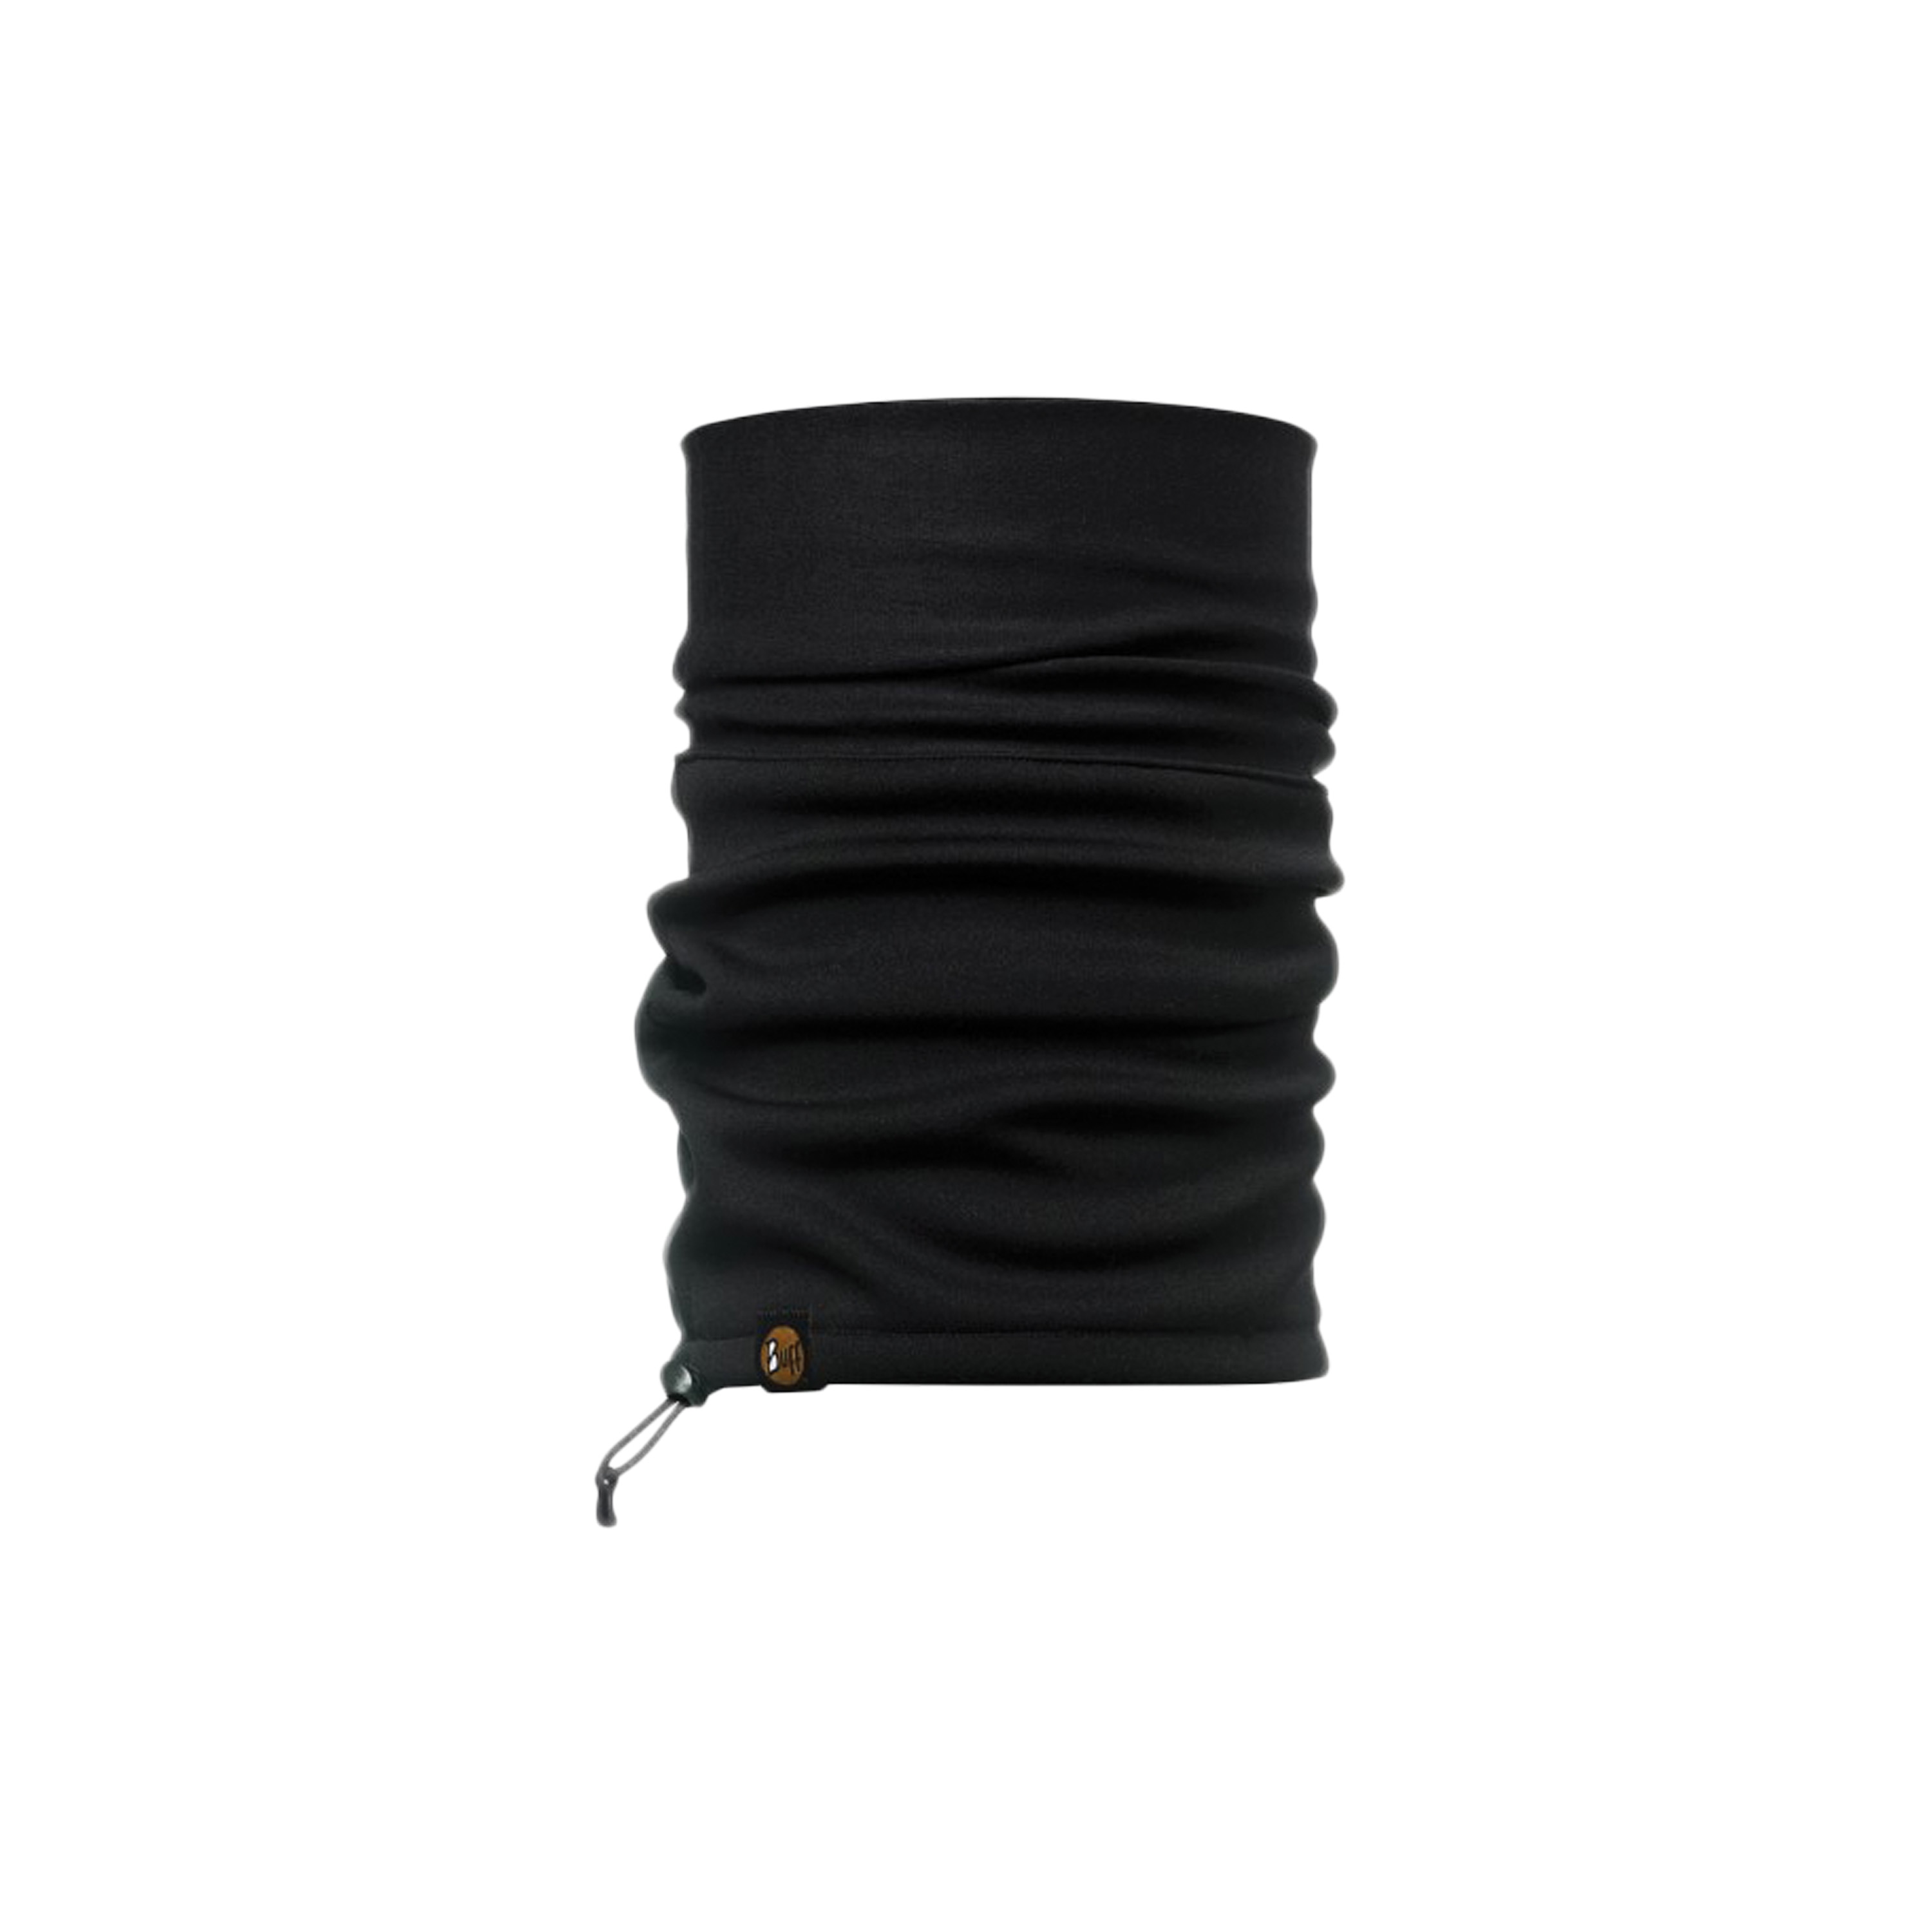 Purchase the Buff Neck Warmer Pro black by ASMC